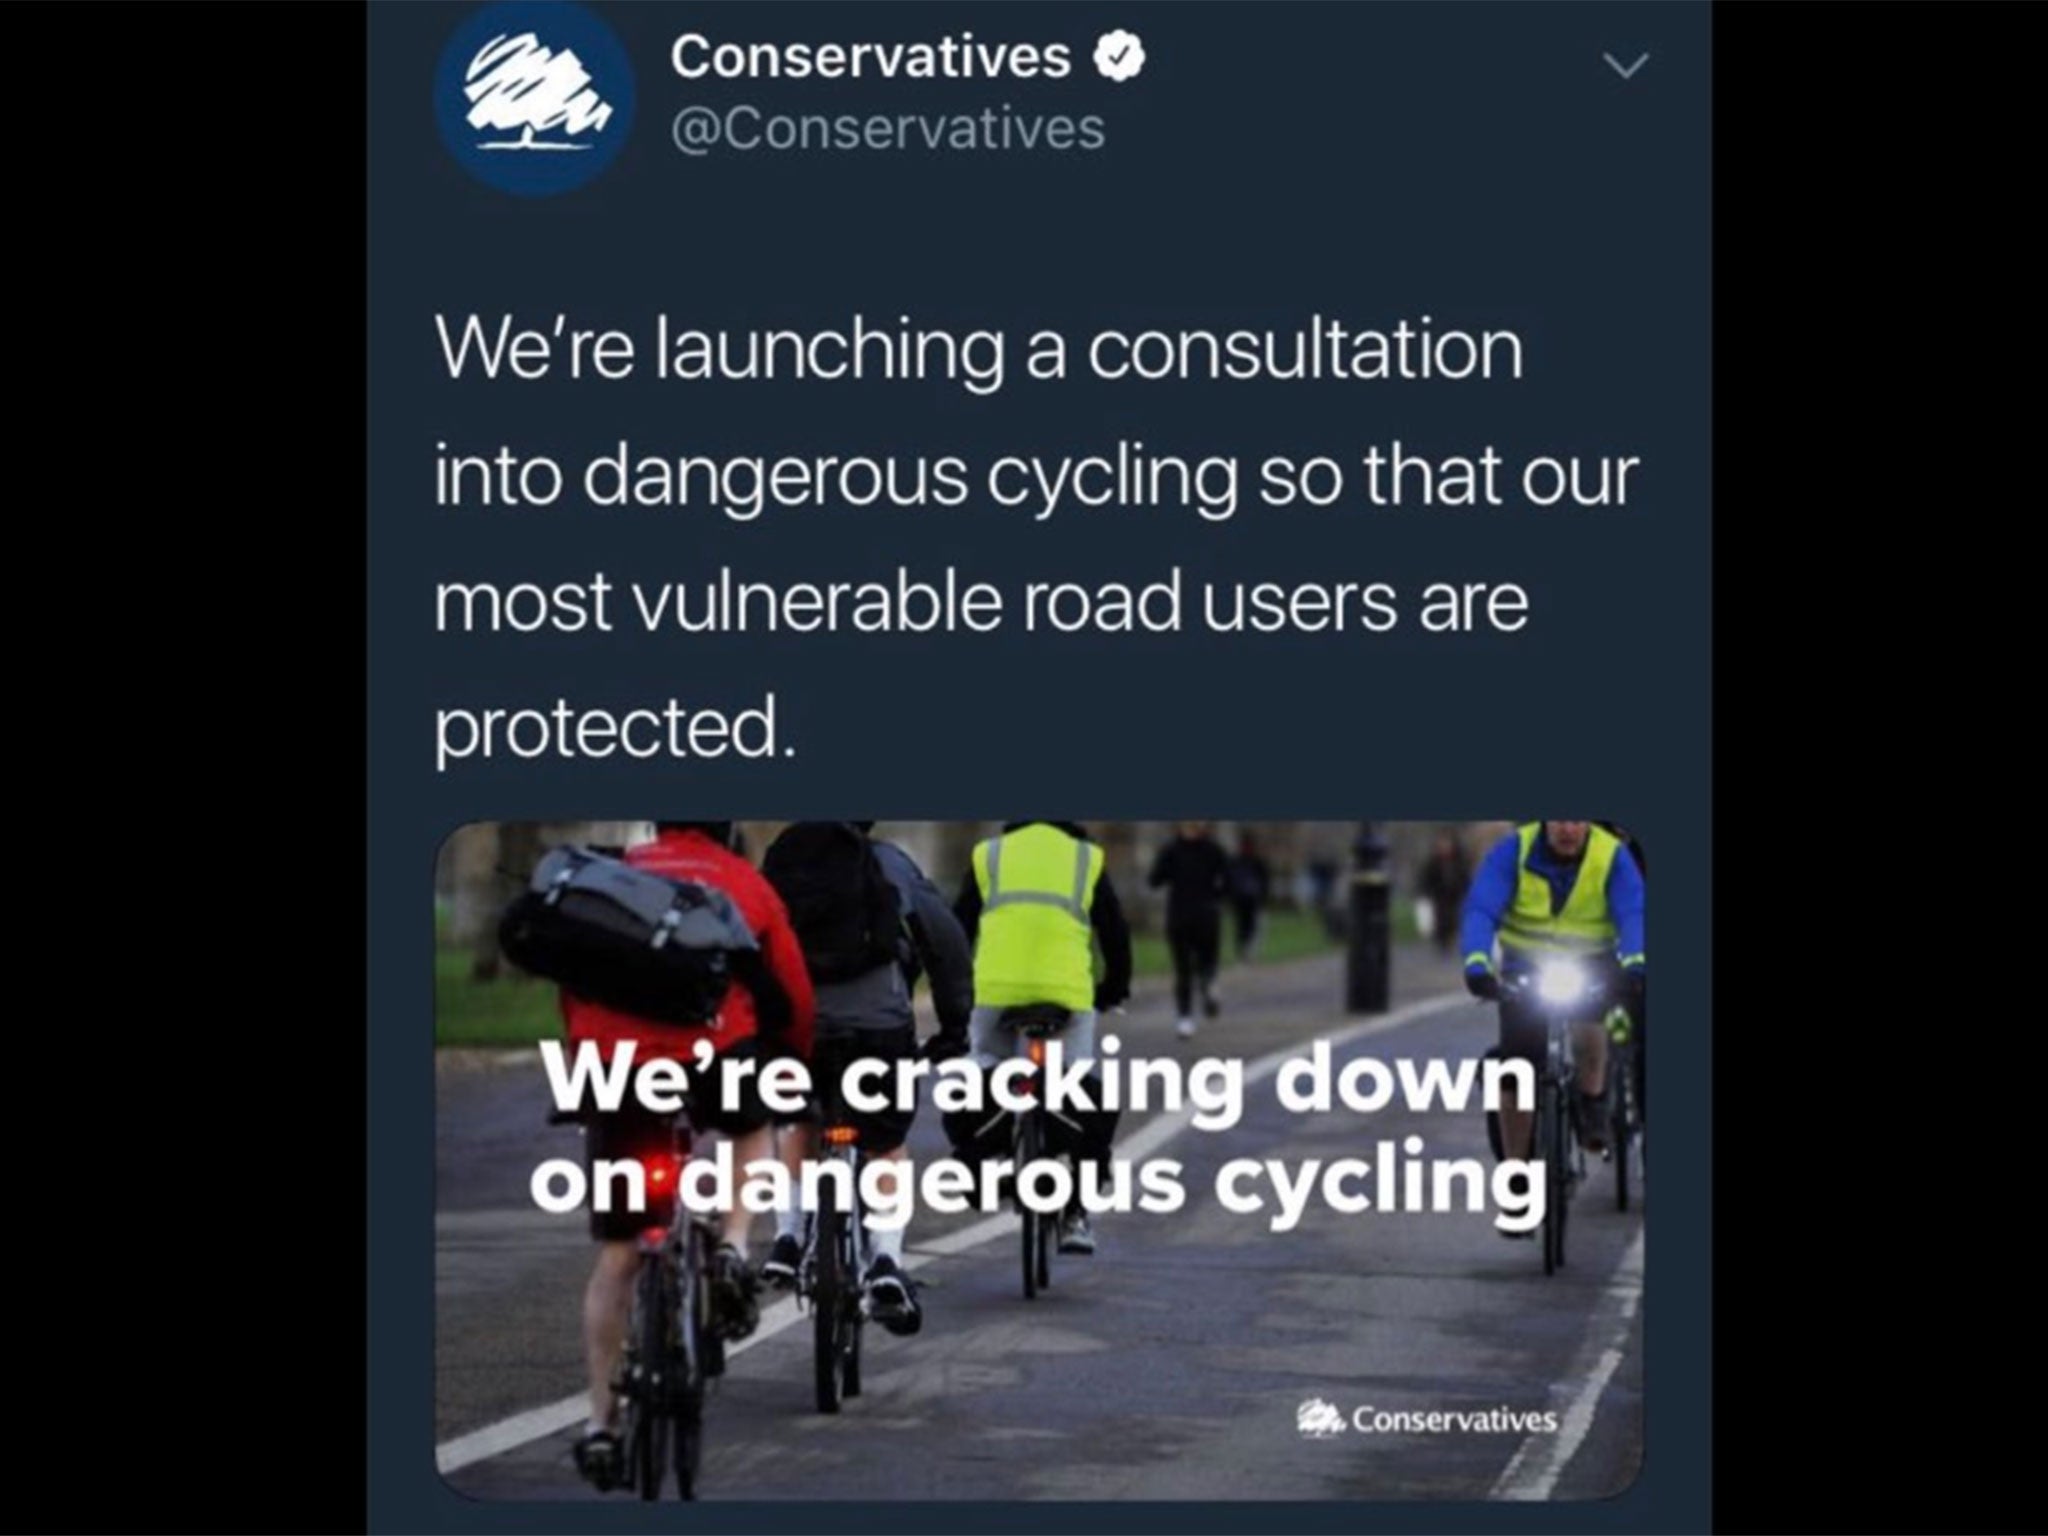 The tweet from the official Conservative Party account